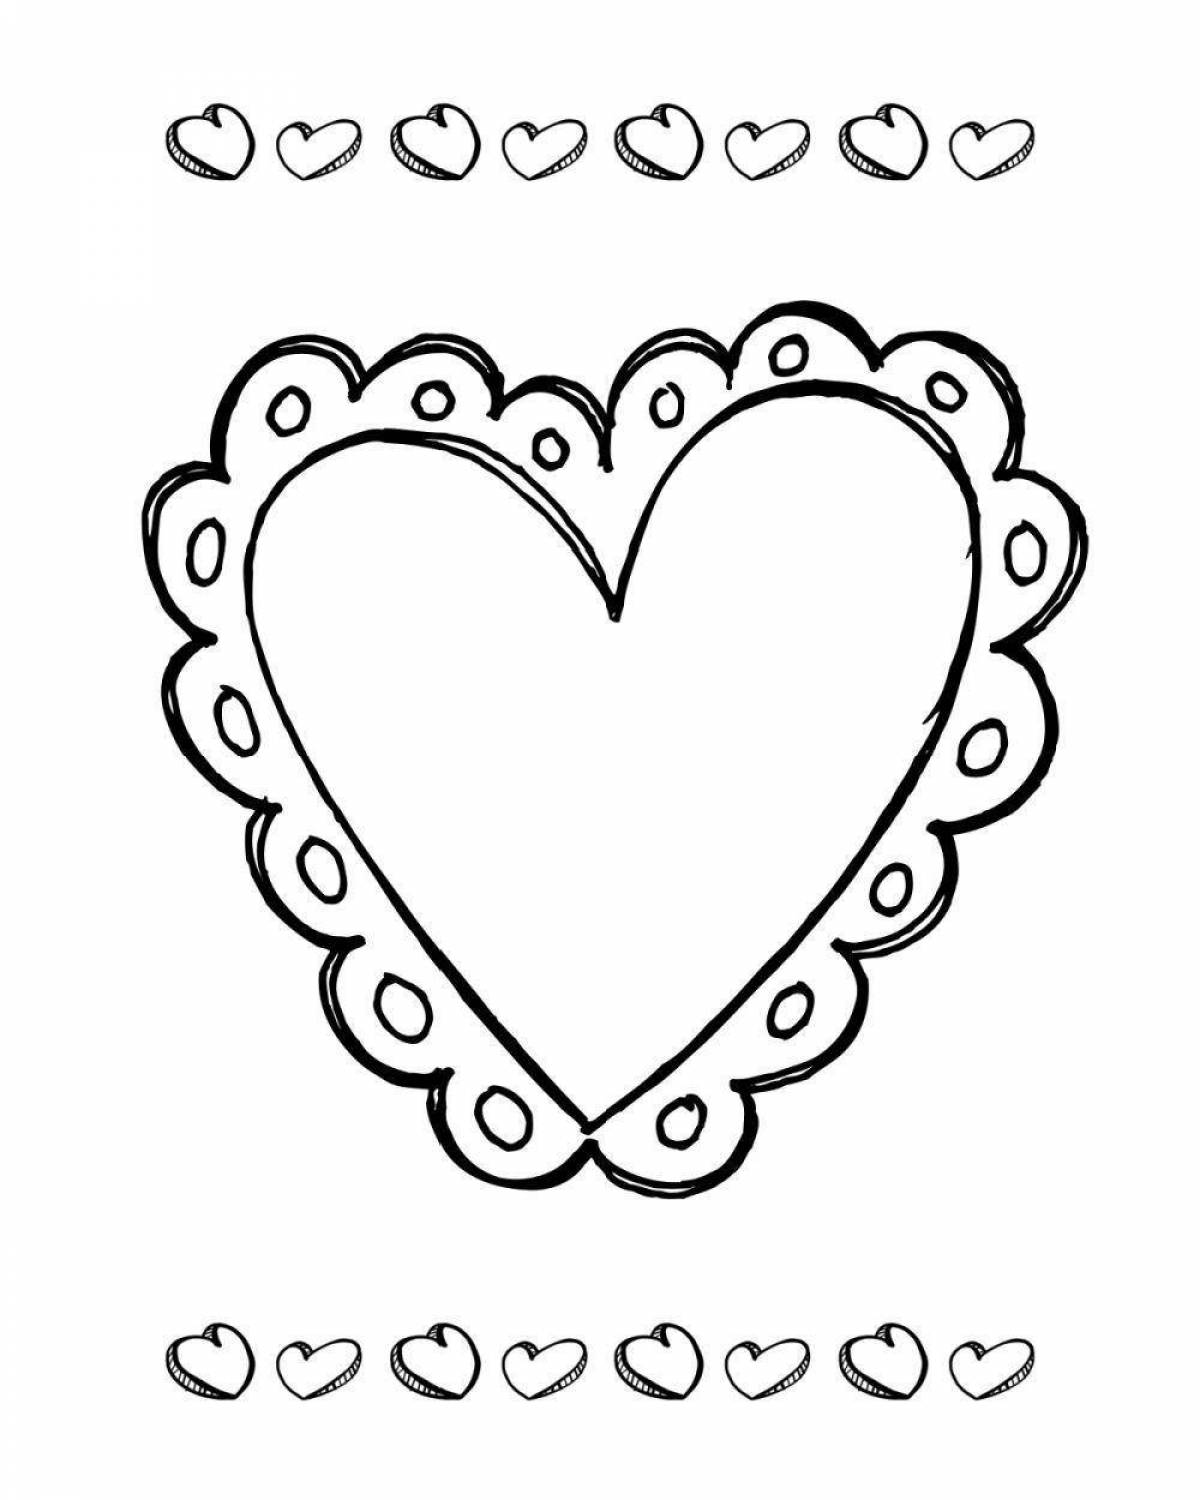 Mom's Live Heart Coloring Page